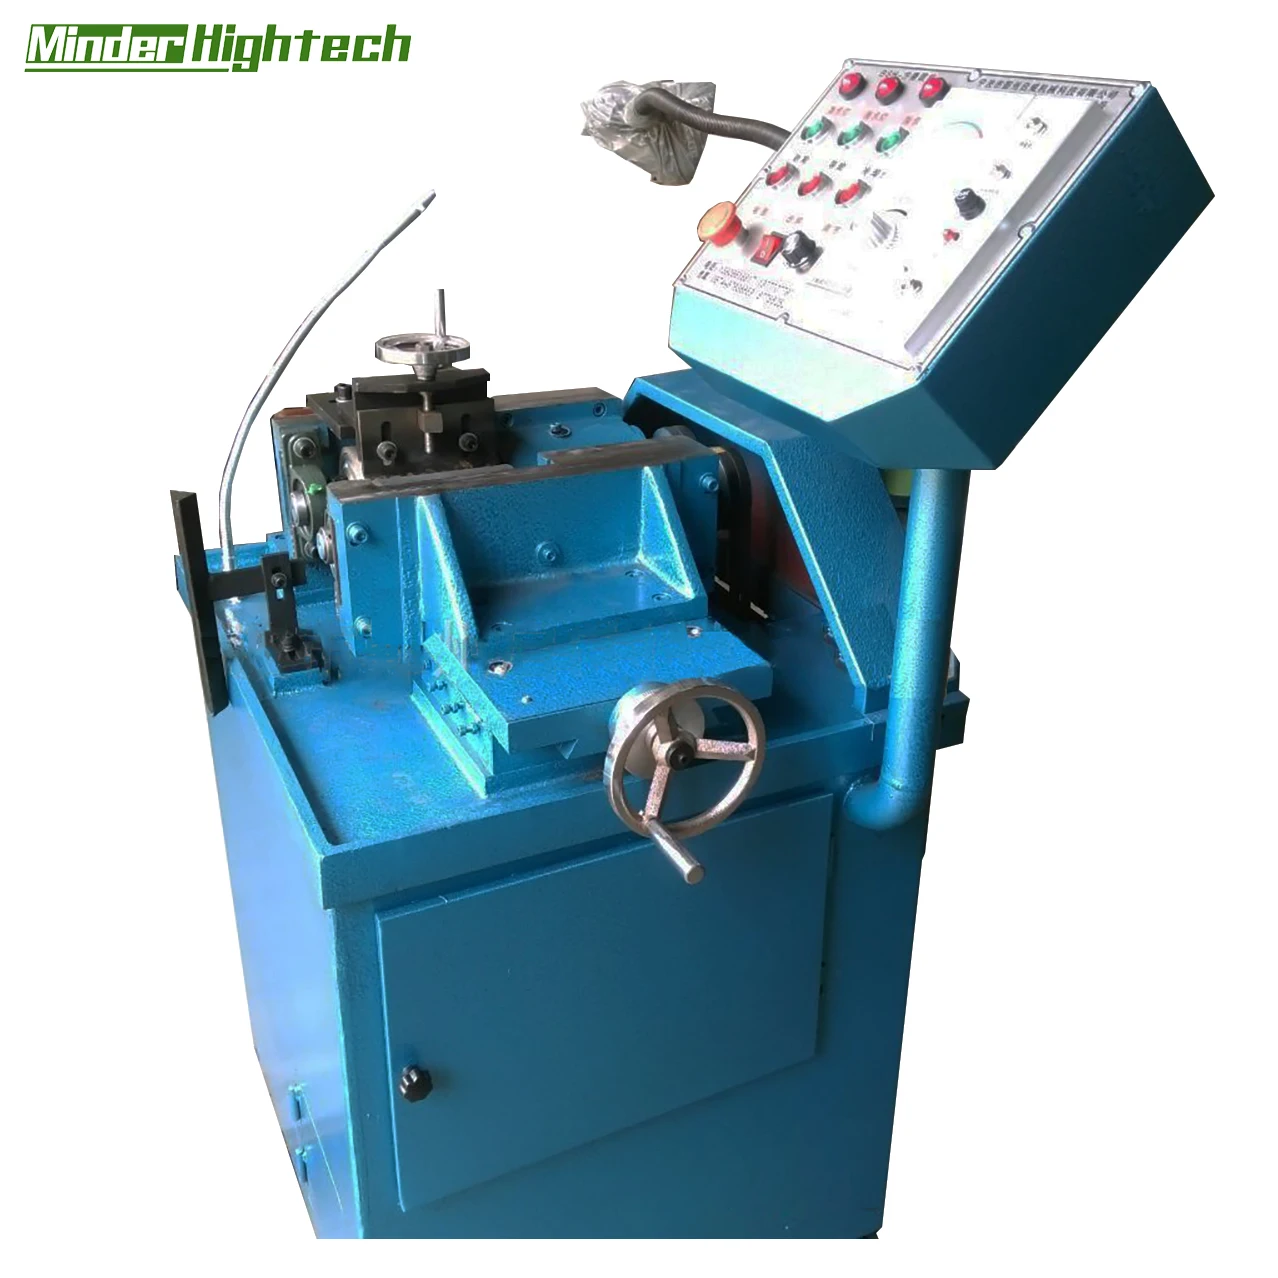 The automatic inner circle slicer is a special equipment for high-precision cutting of glass materials.